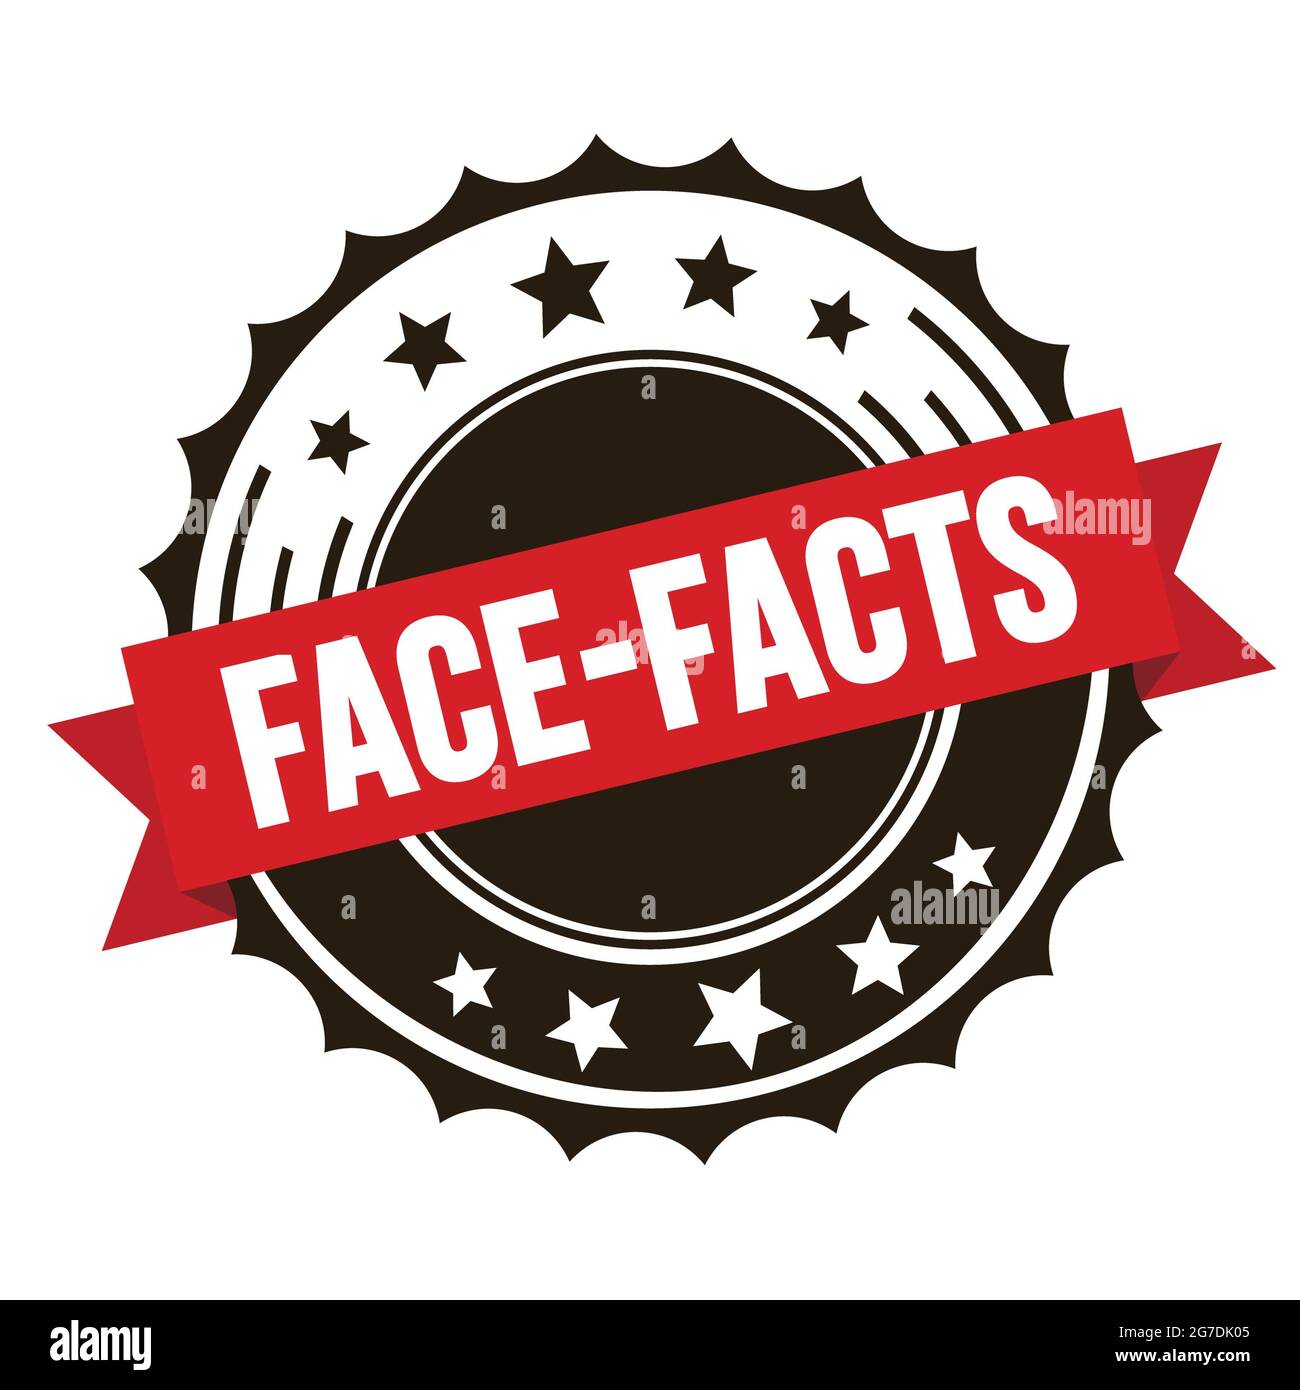 FACE-FACTS text on red brown ribbon badge stamp. Stock Photo